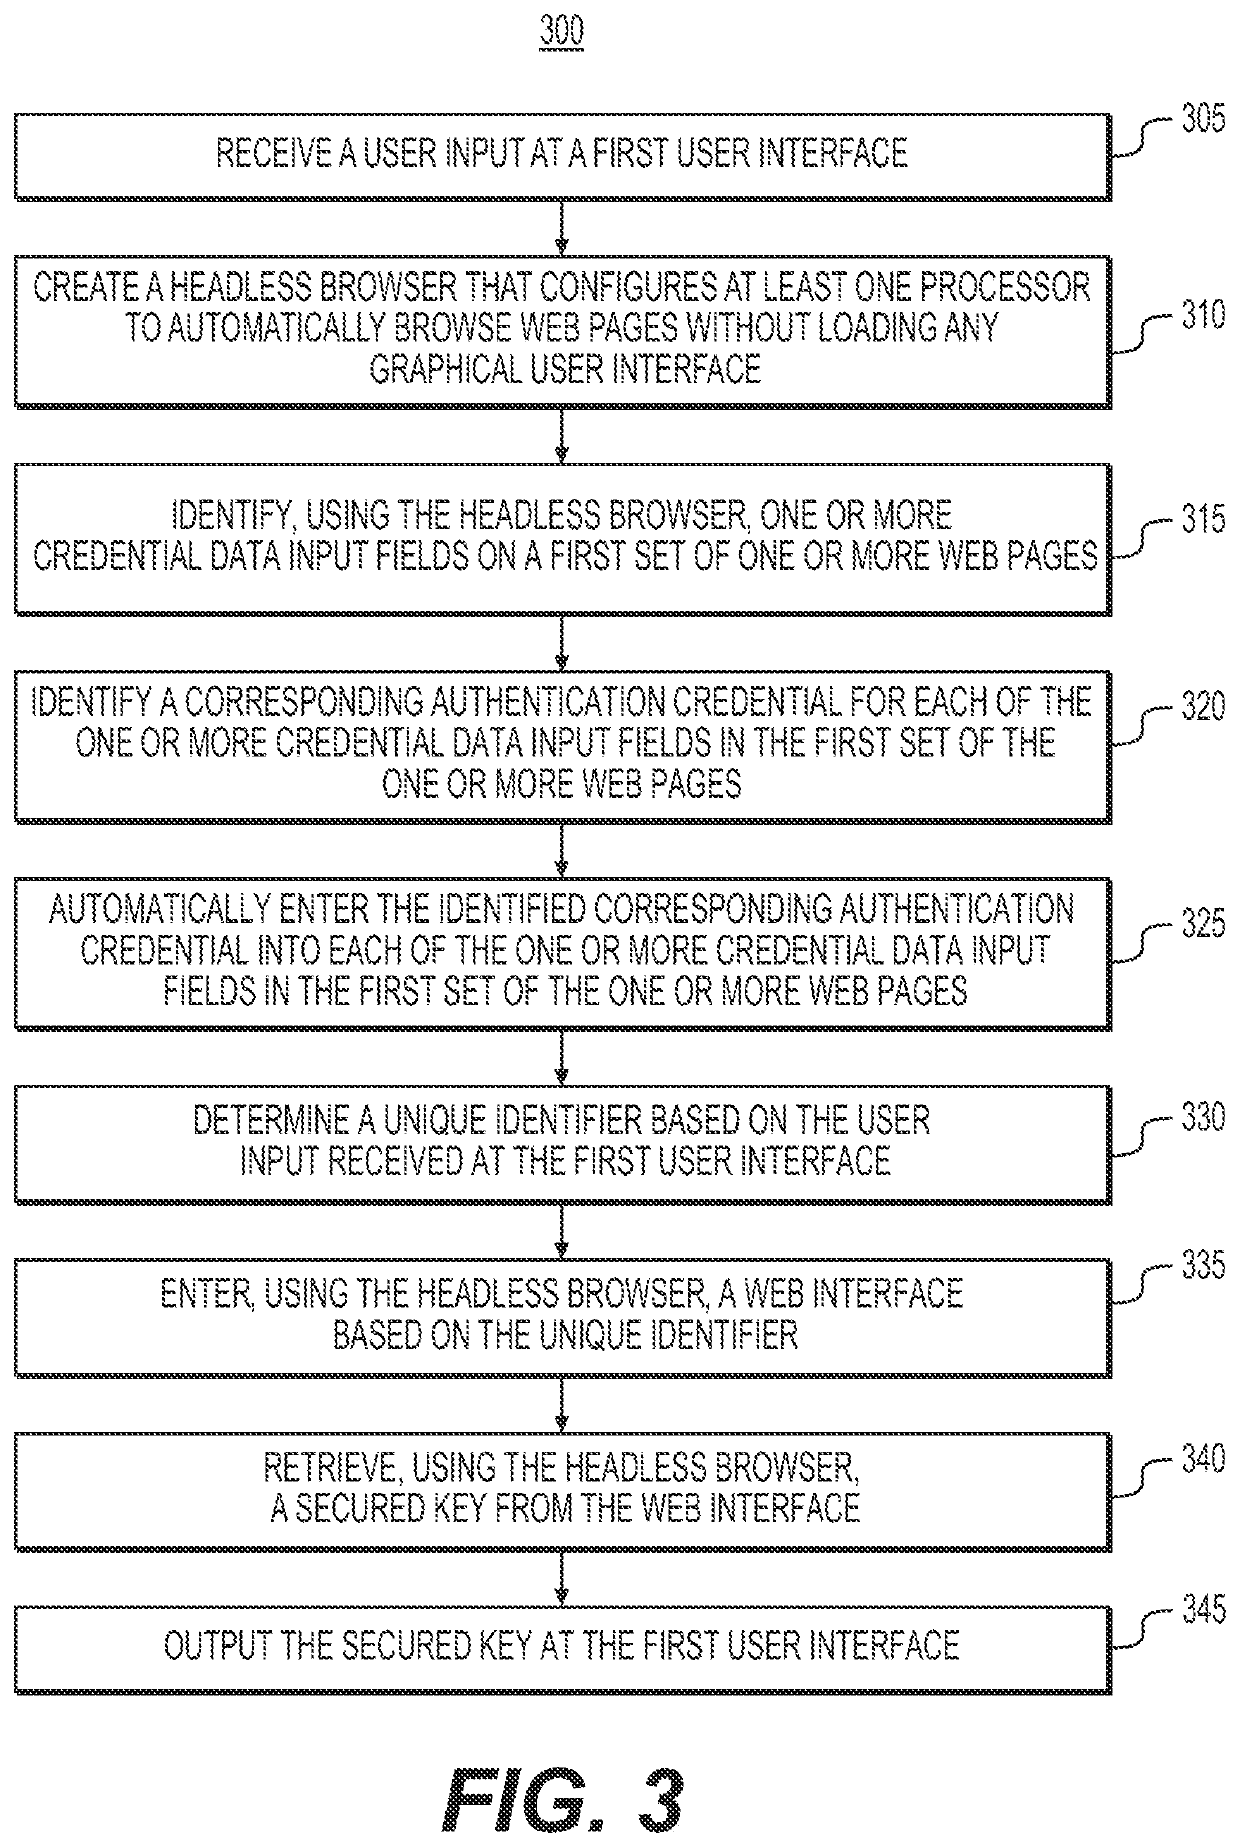 Systems and methods for using automated browsing to recover secured key from a single data entry